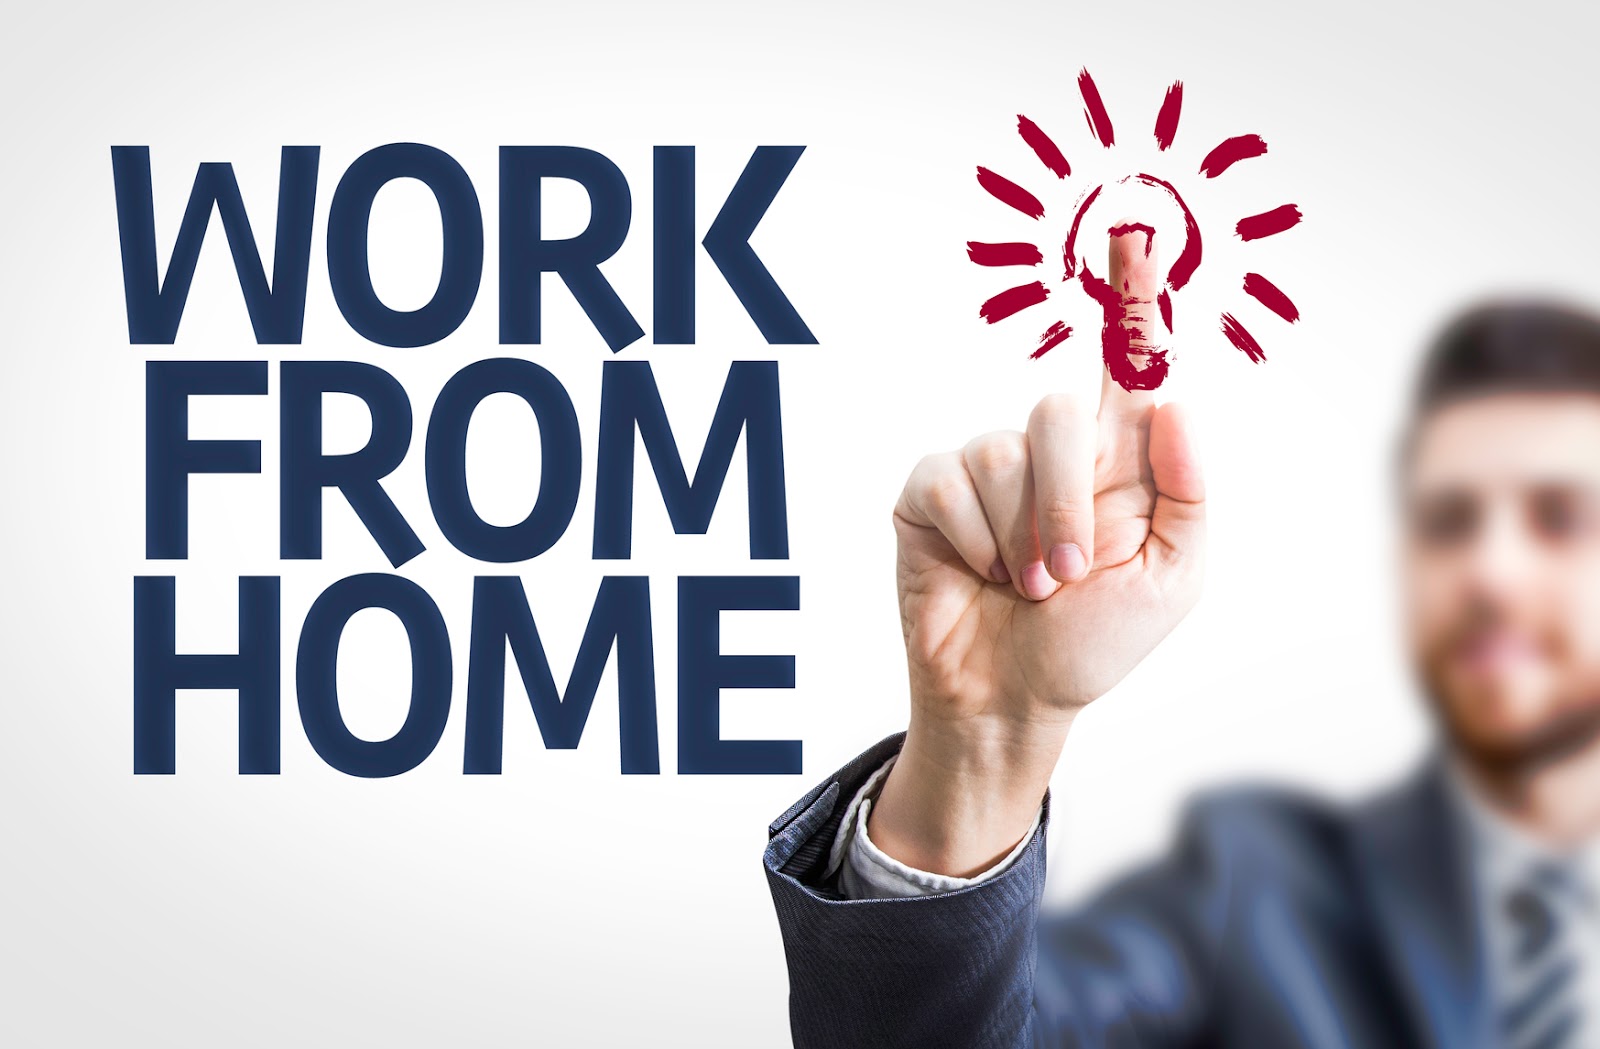 Work from Home and Personal Business Guide: Work from Home Ideas, 10